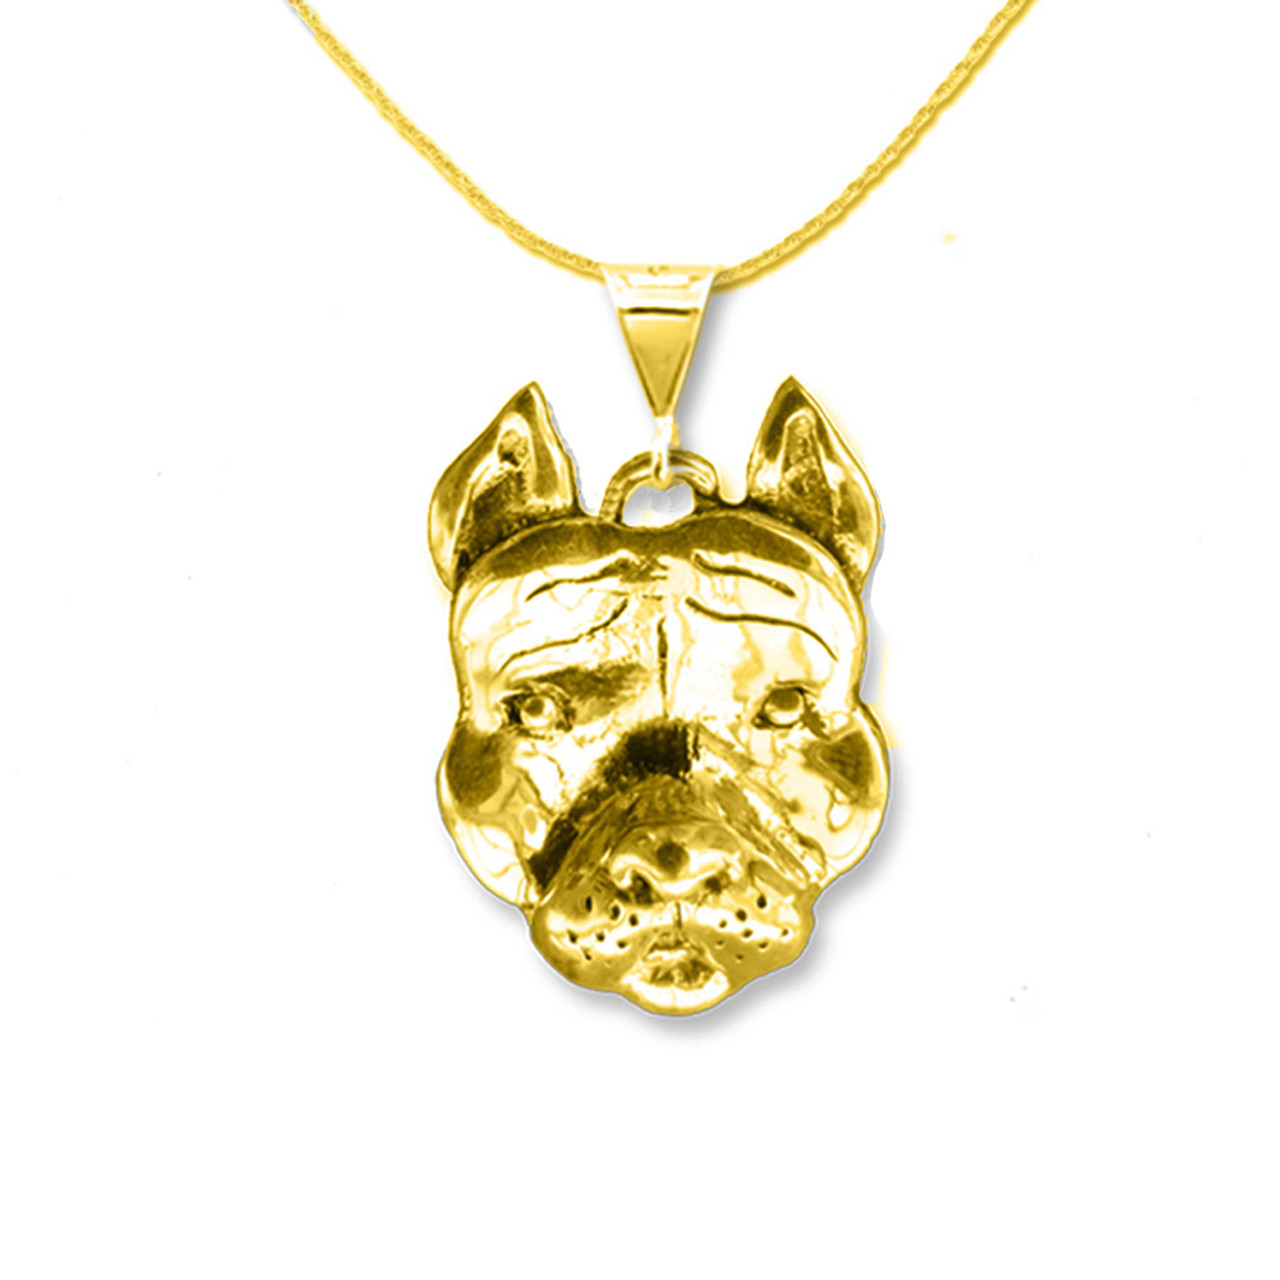 Solid 925 Silver 14k Gold Plated Pitbull Dog Pendant Iced CZ Necklace Hip  Hop | eBay